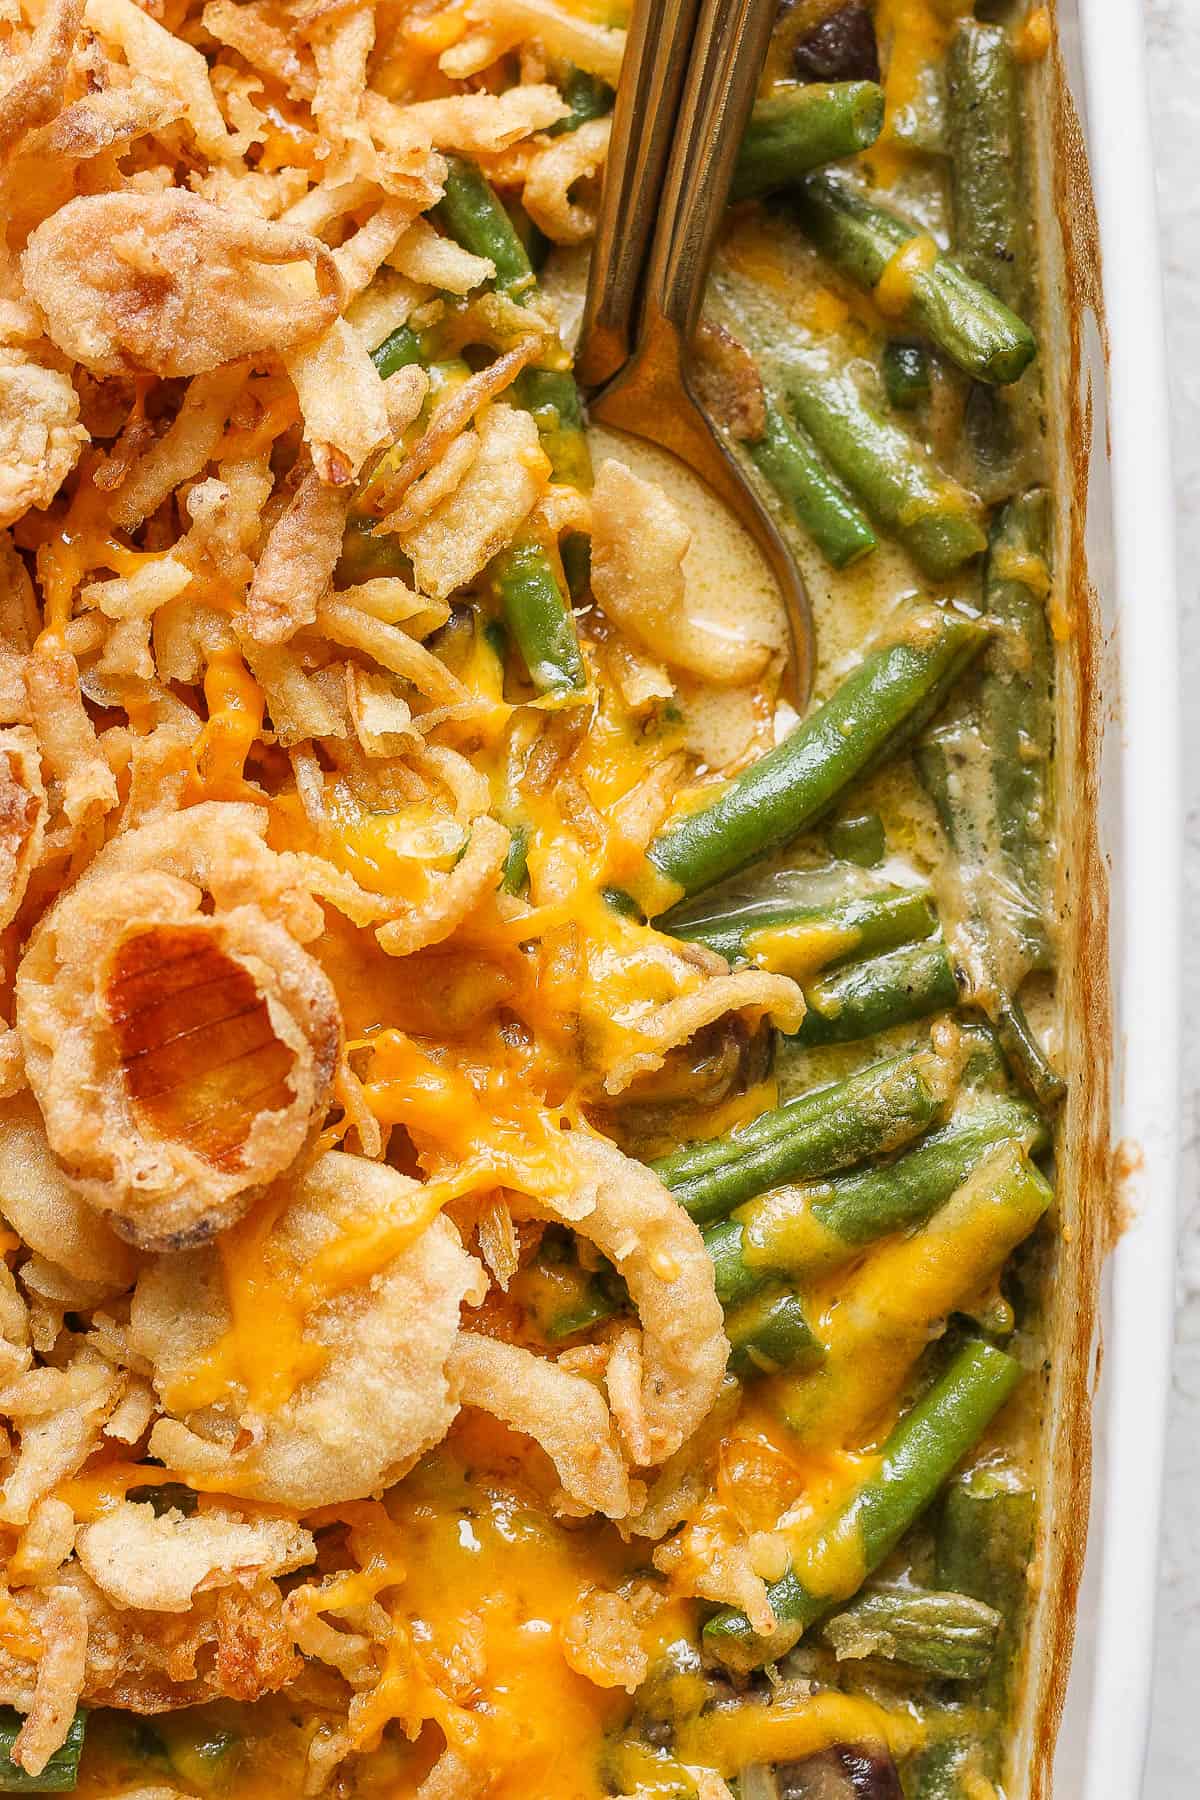 A close-up shot of the baked cheesy green bean casserole.